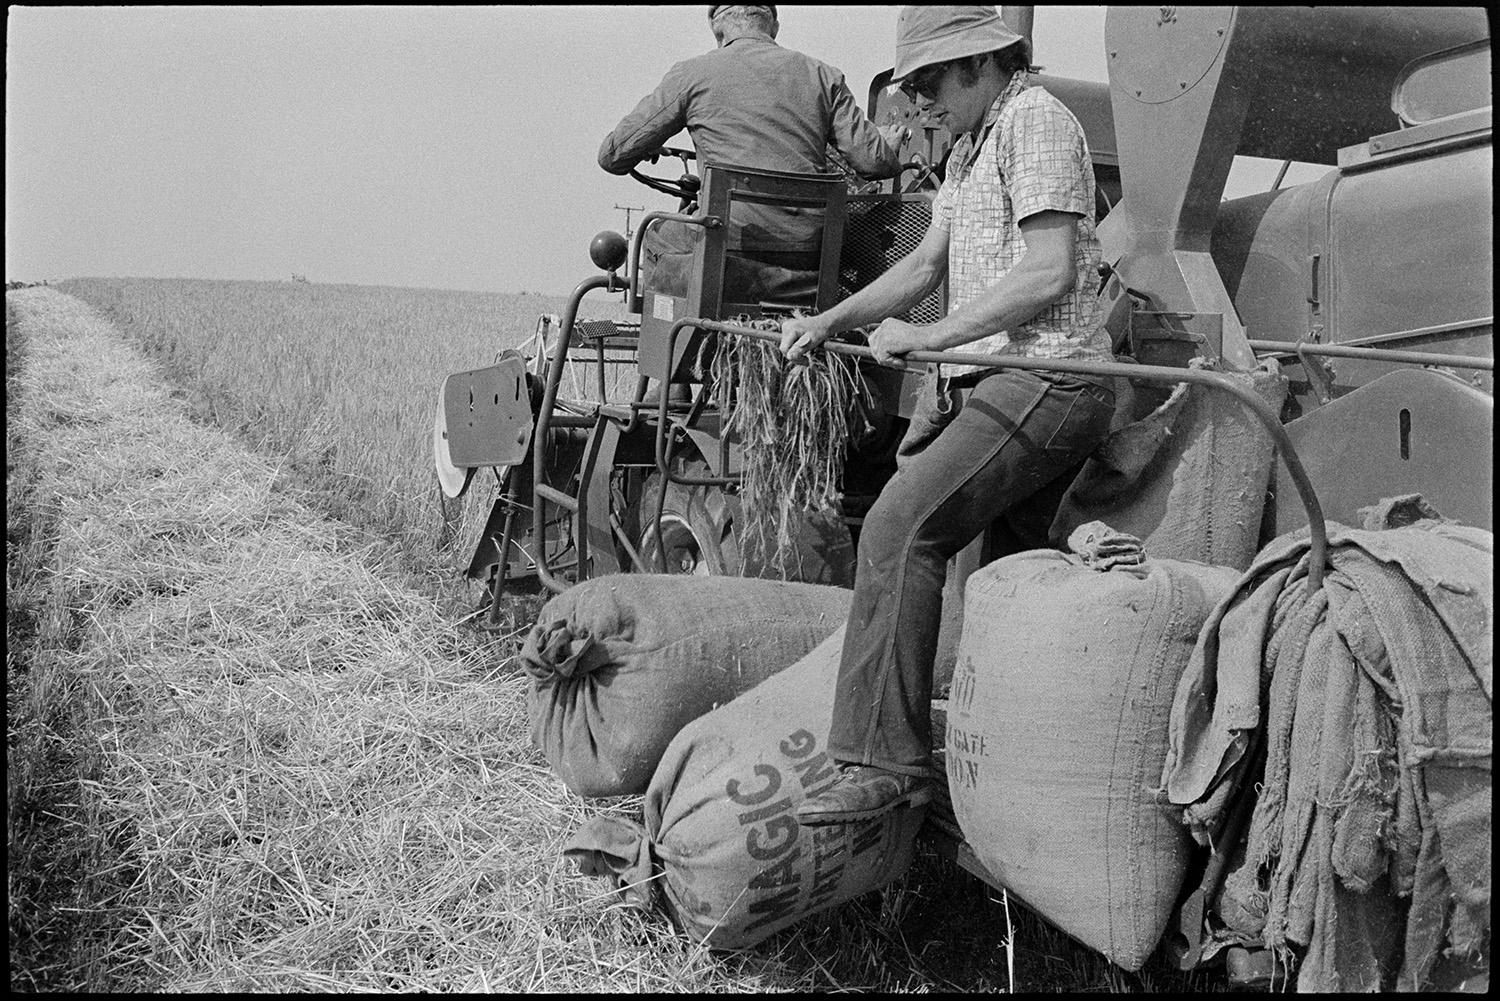 Two men using a combine harvester to harvest a crop in a field at Parsonage,Iddesleigh. One of the men is driving the combine harvester while the other is managing sacks of grain.